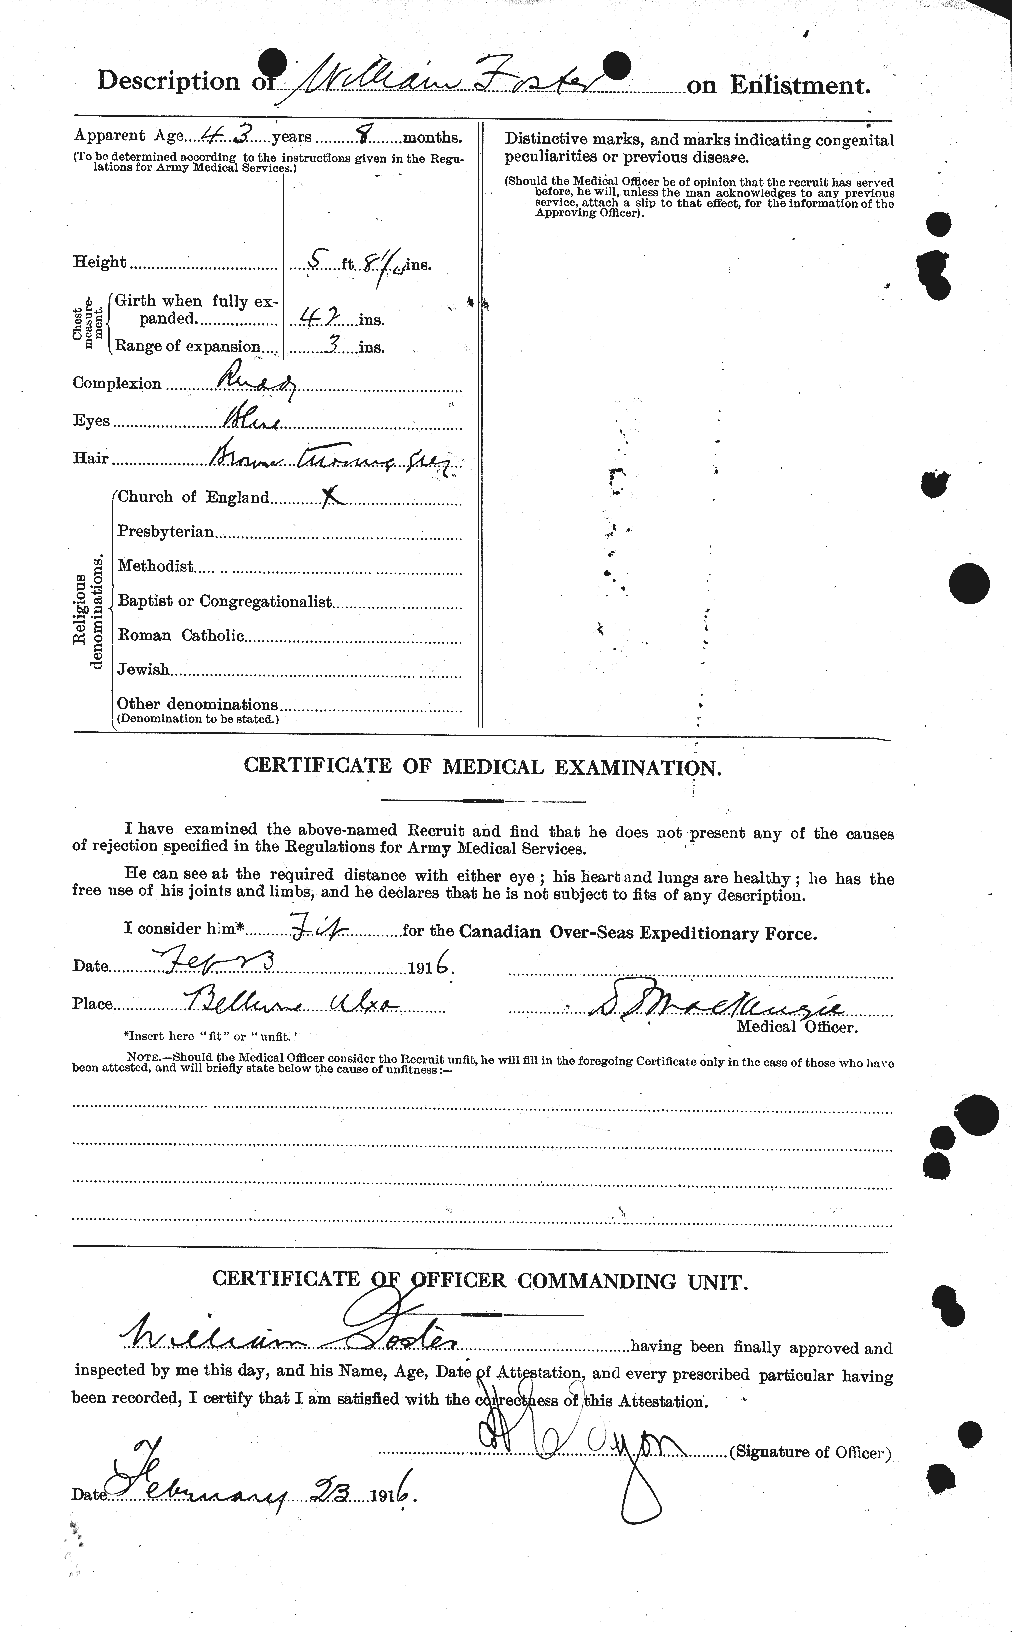 Personnel Records of the First World War - CEF 328710b